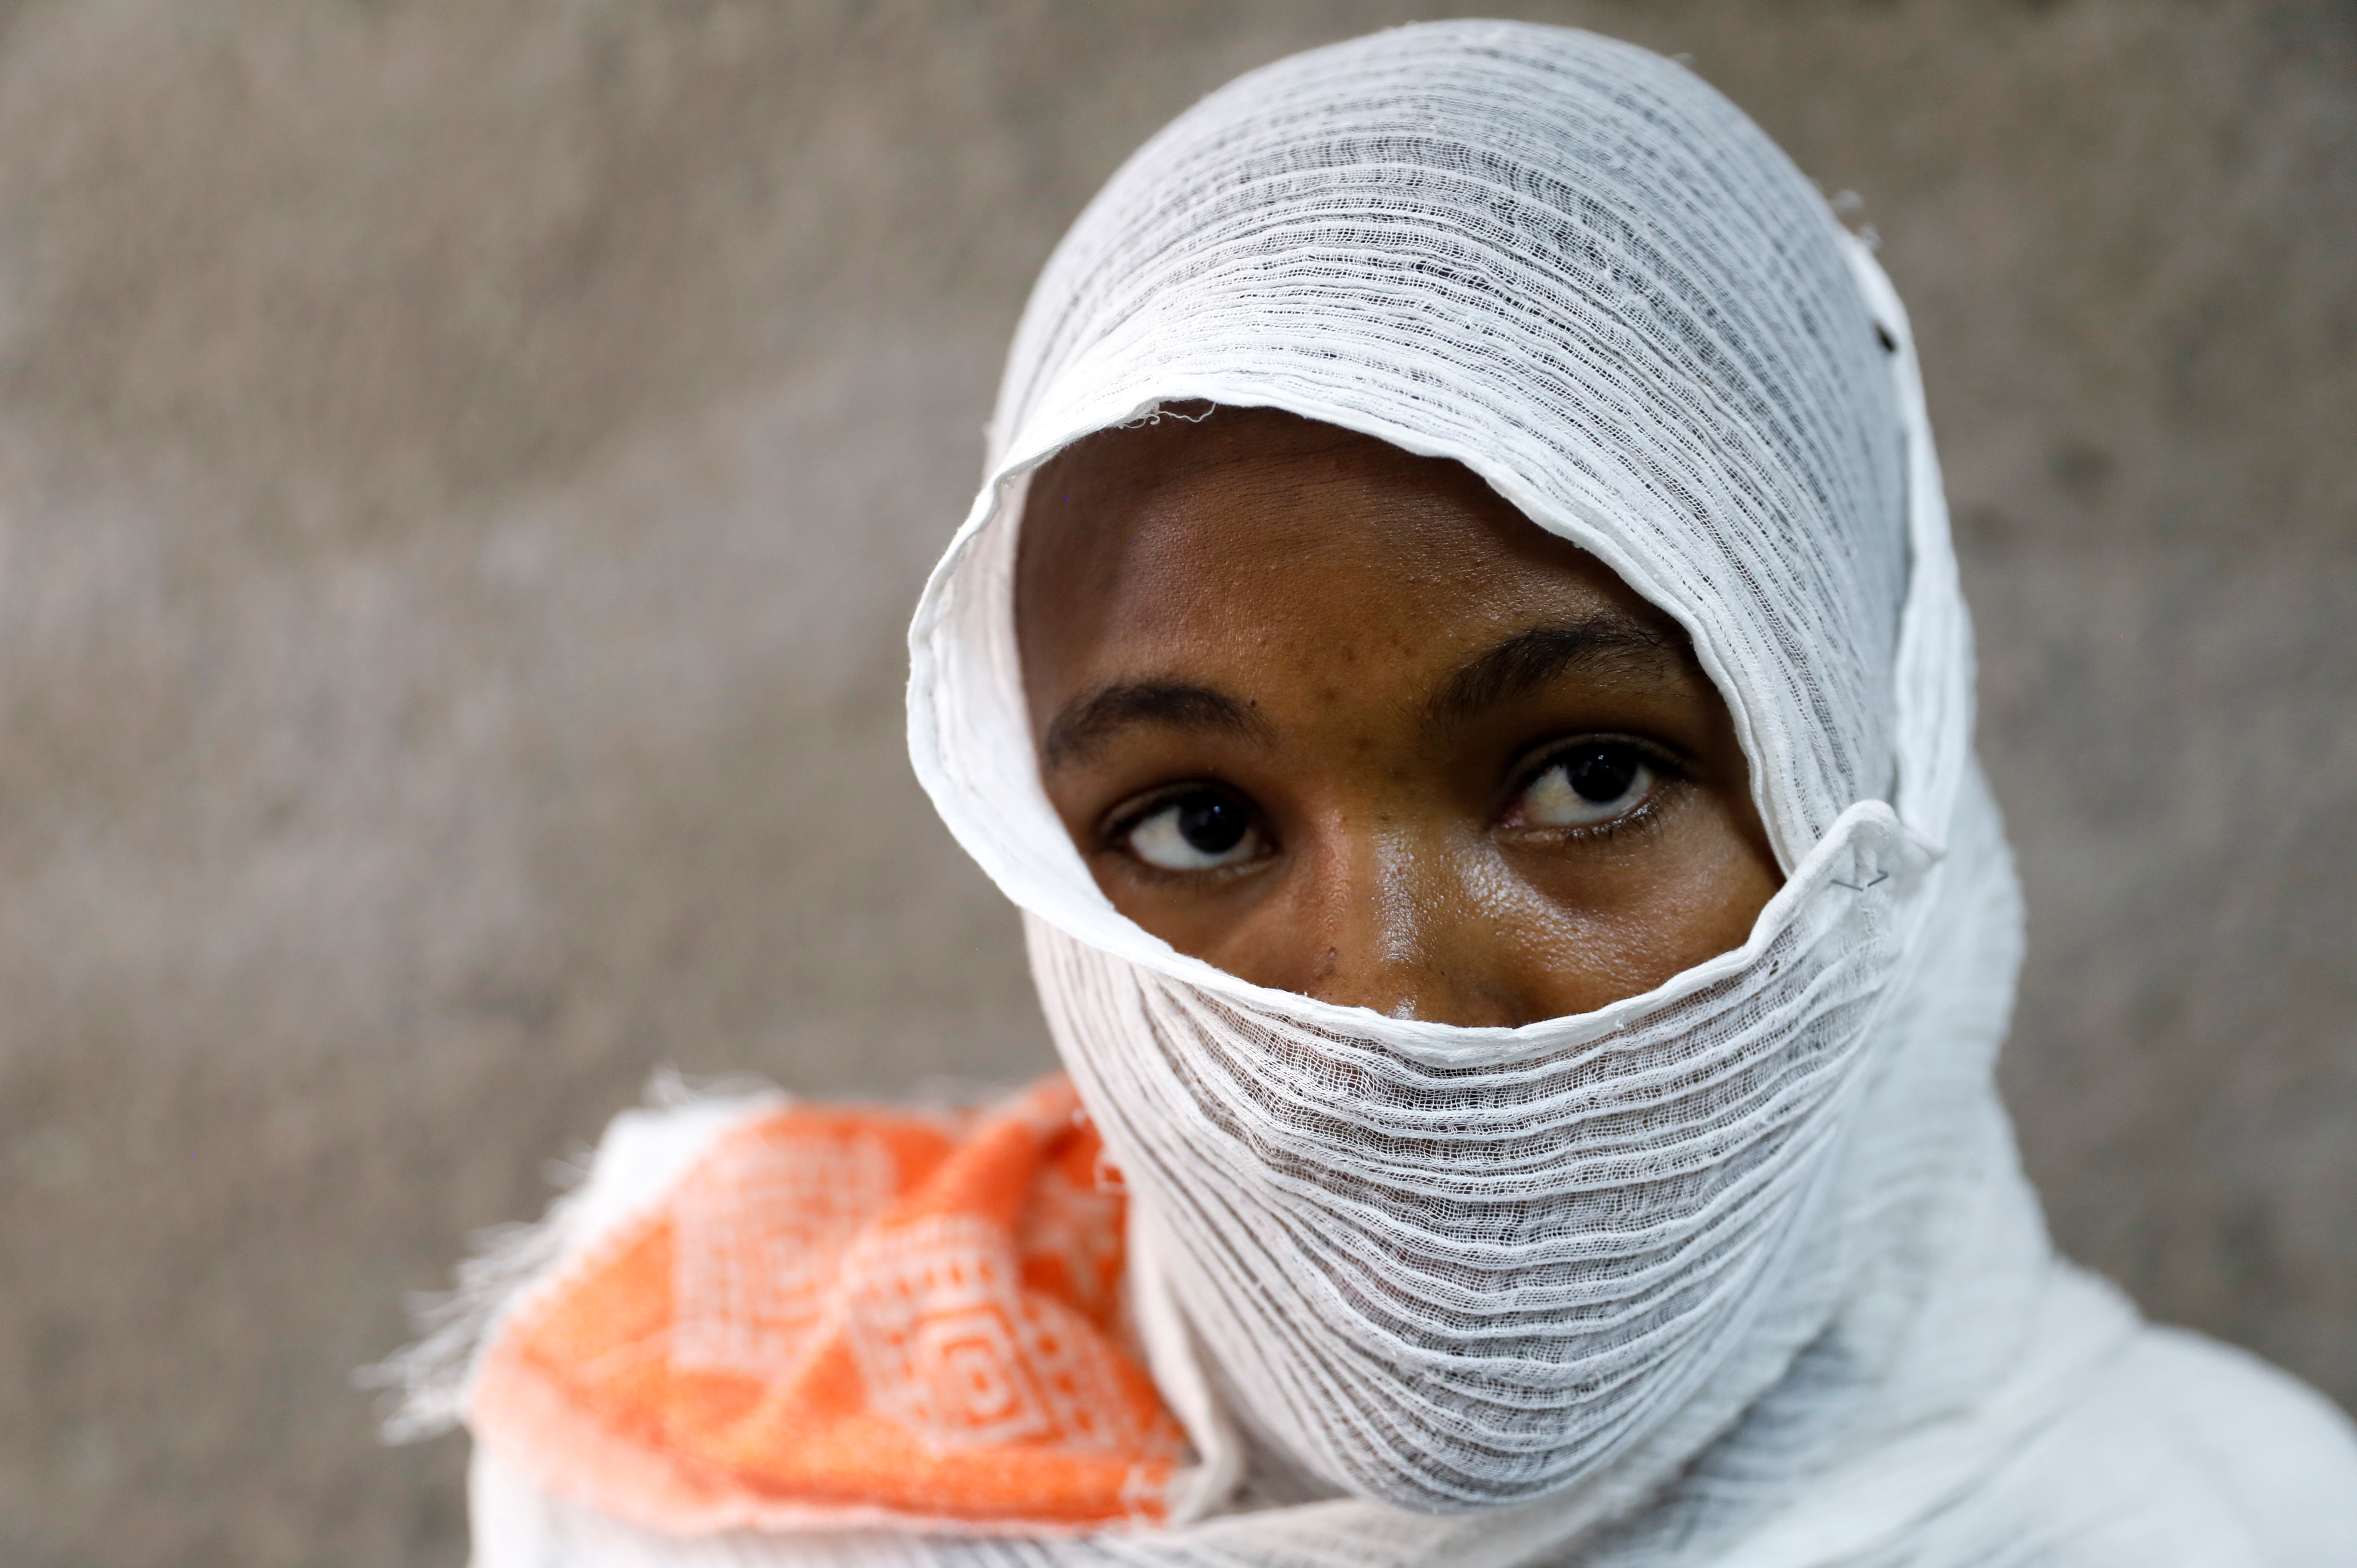 Ethiopian woman who says she was gang-raped by armed men is seen during an interview with Reuters in a hospital in the town of Adigrat, Tigray region